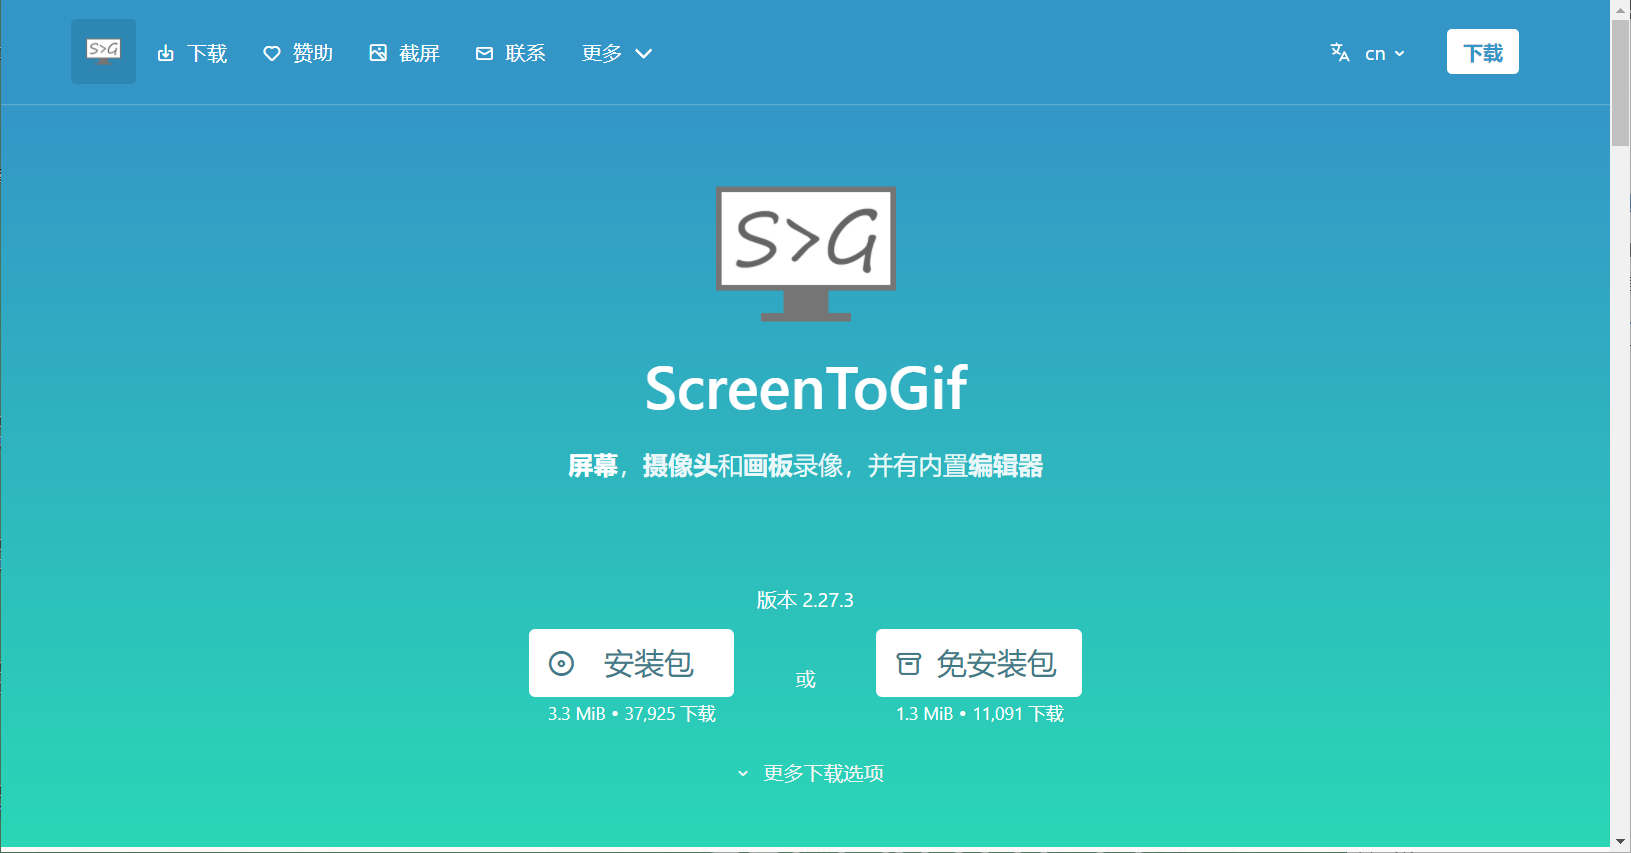 ScreenToGif 2.38.1 download the new version for iphone